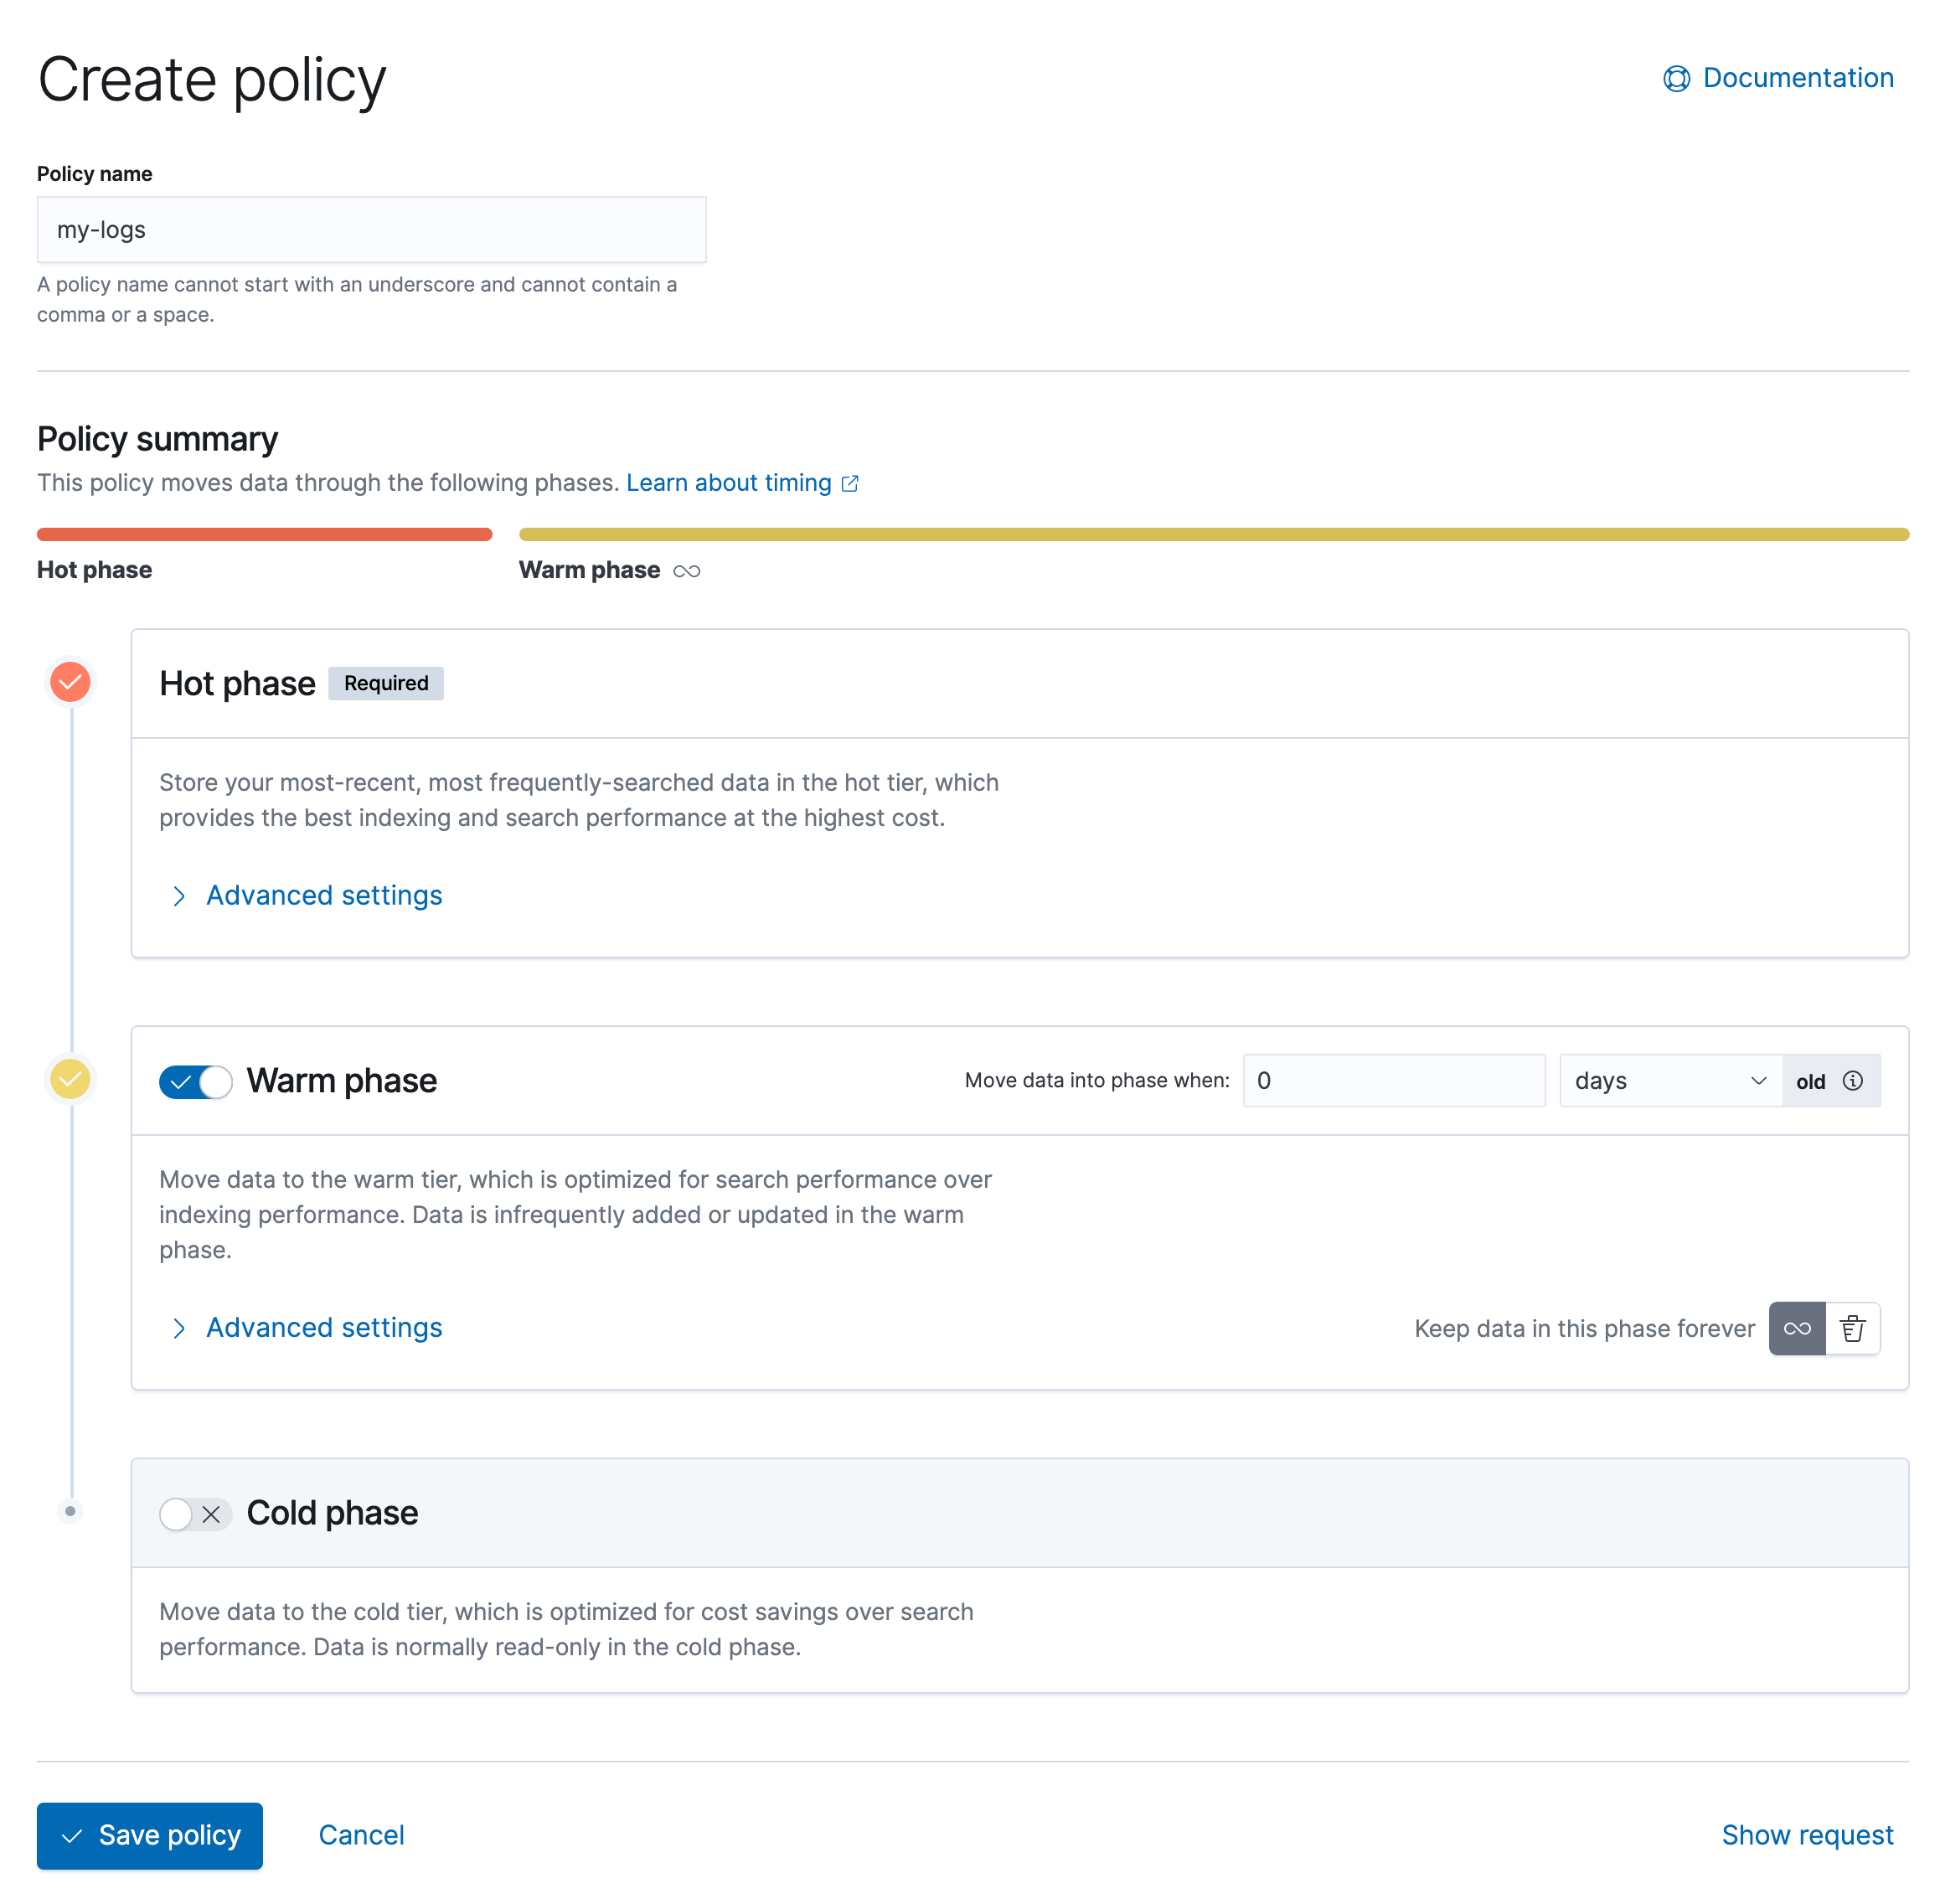 Create policy page